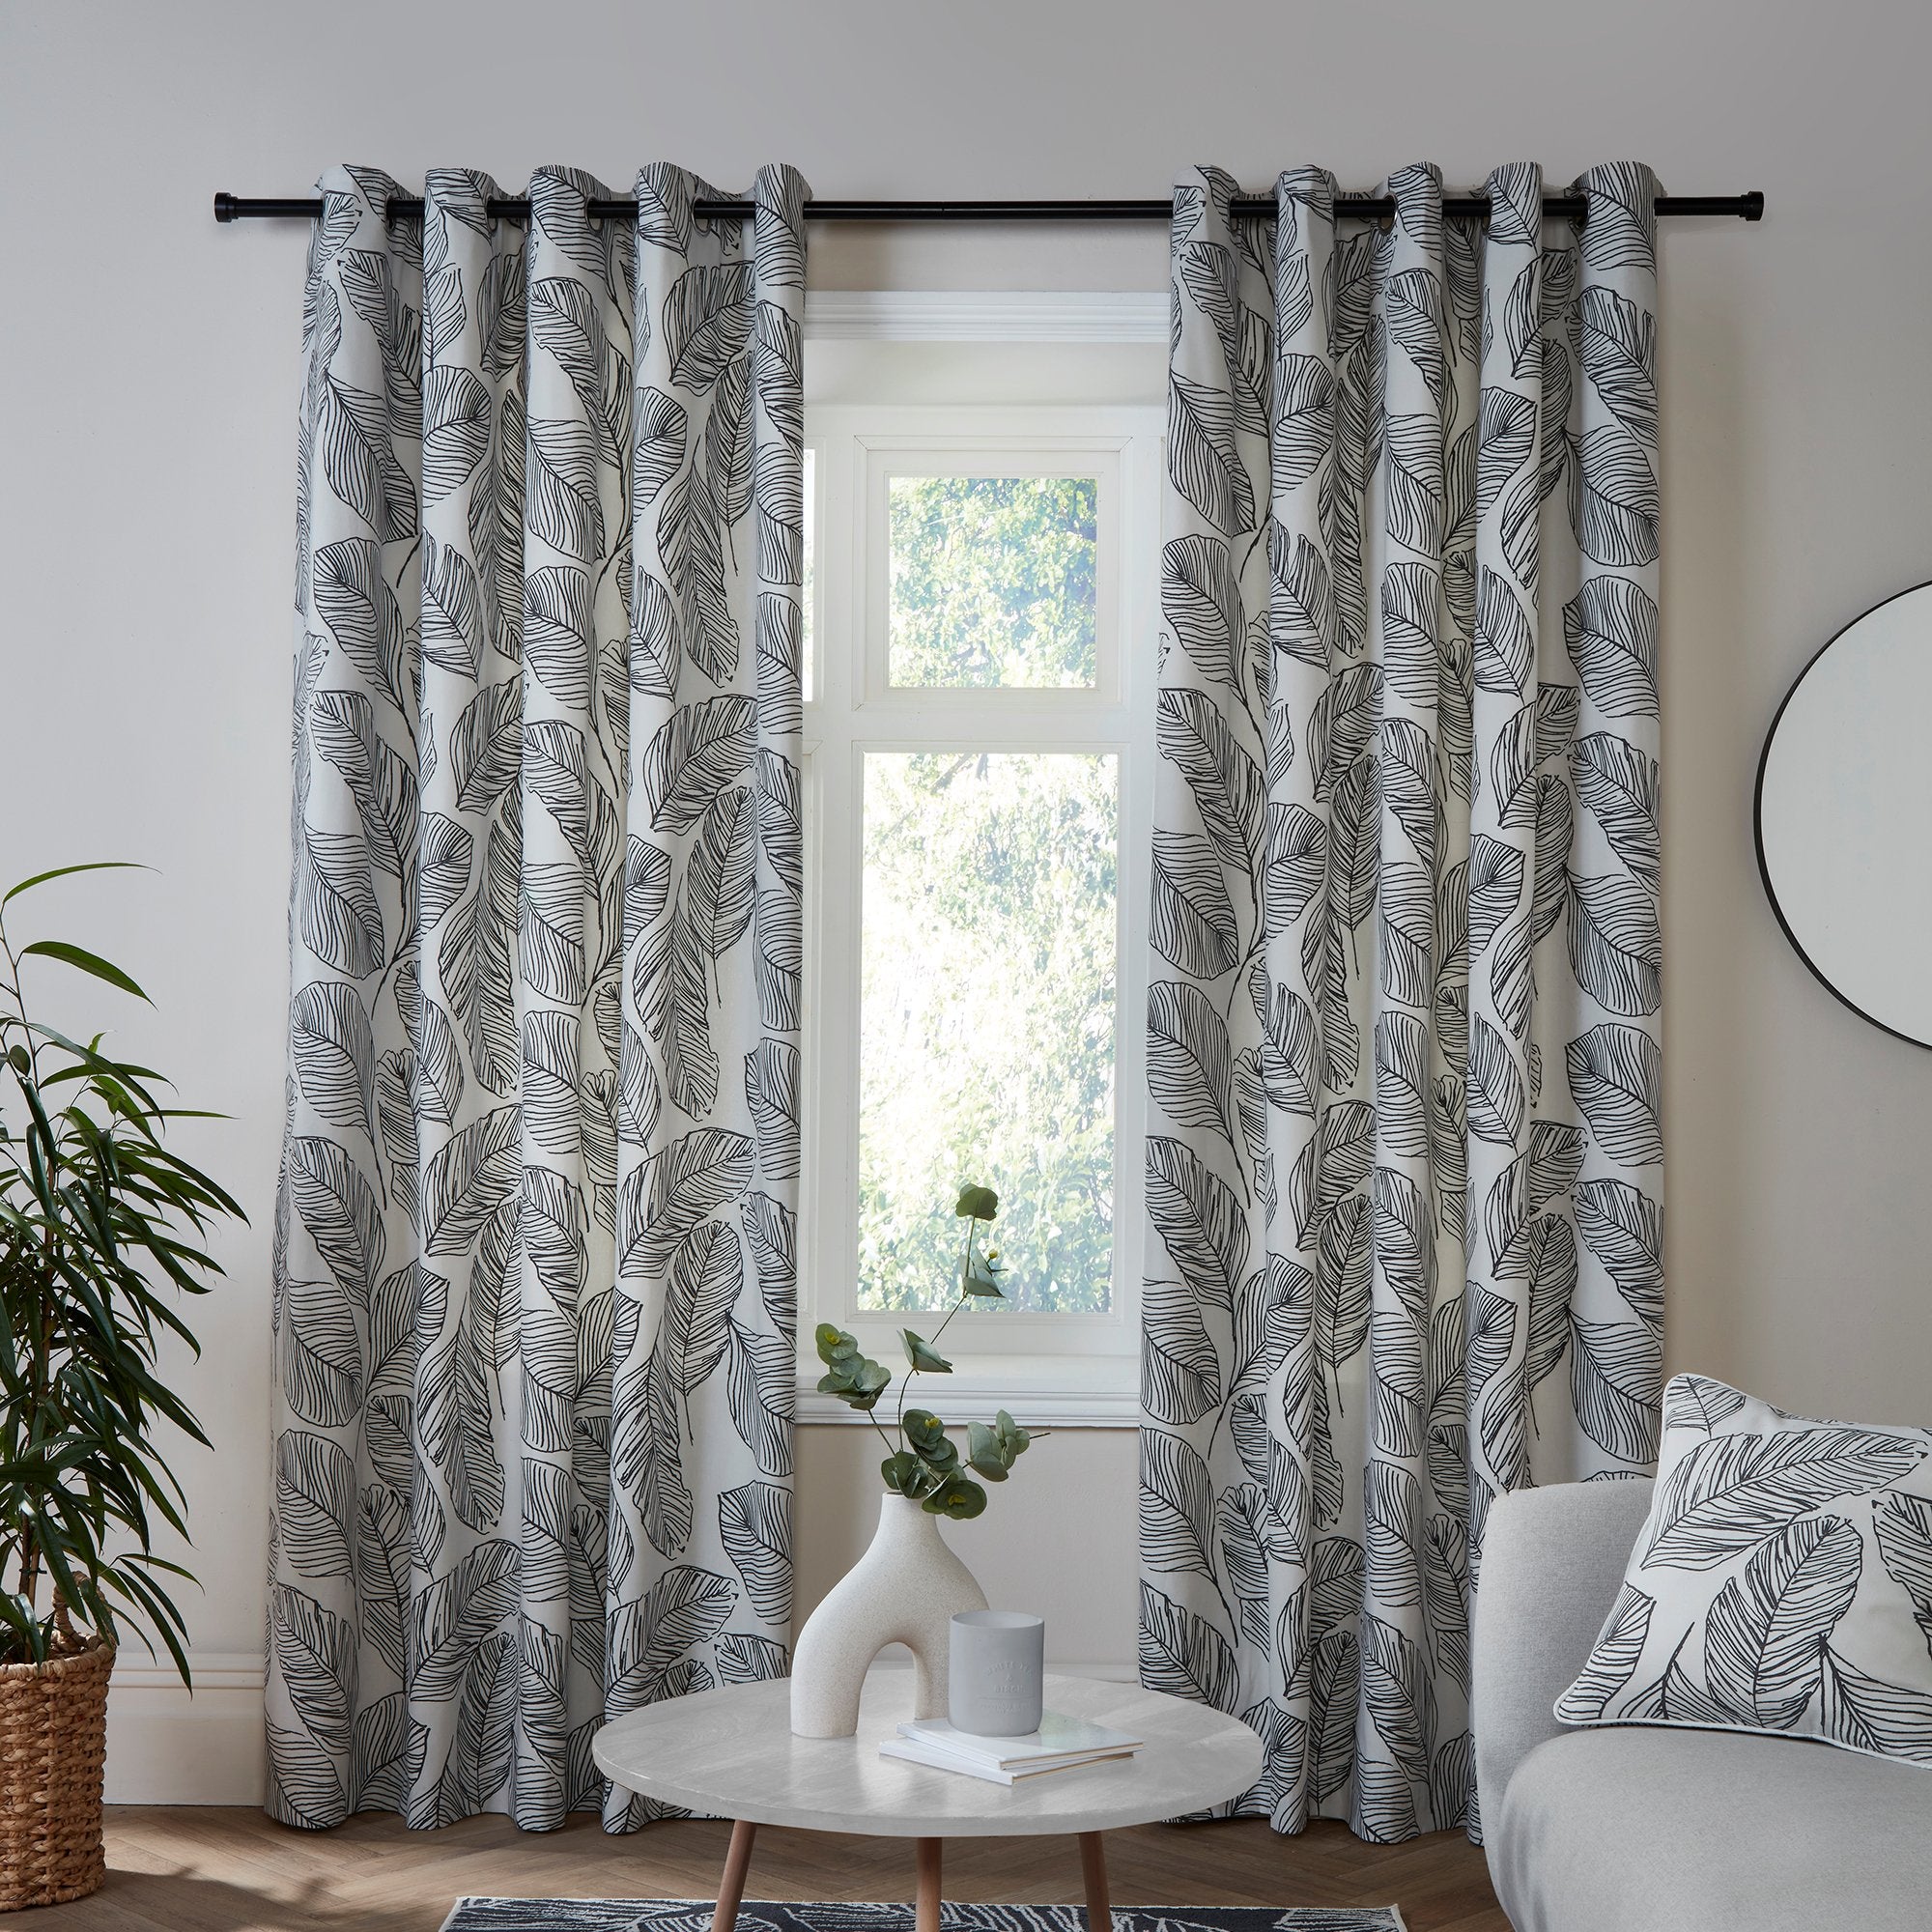 Pair of Eyelet Curtains Matteo by Fusion in Black